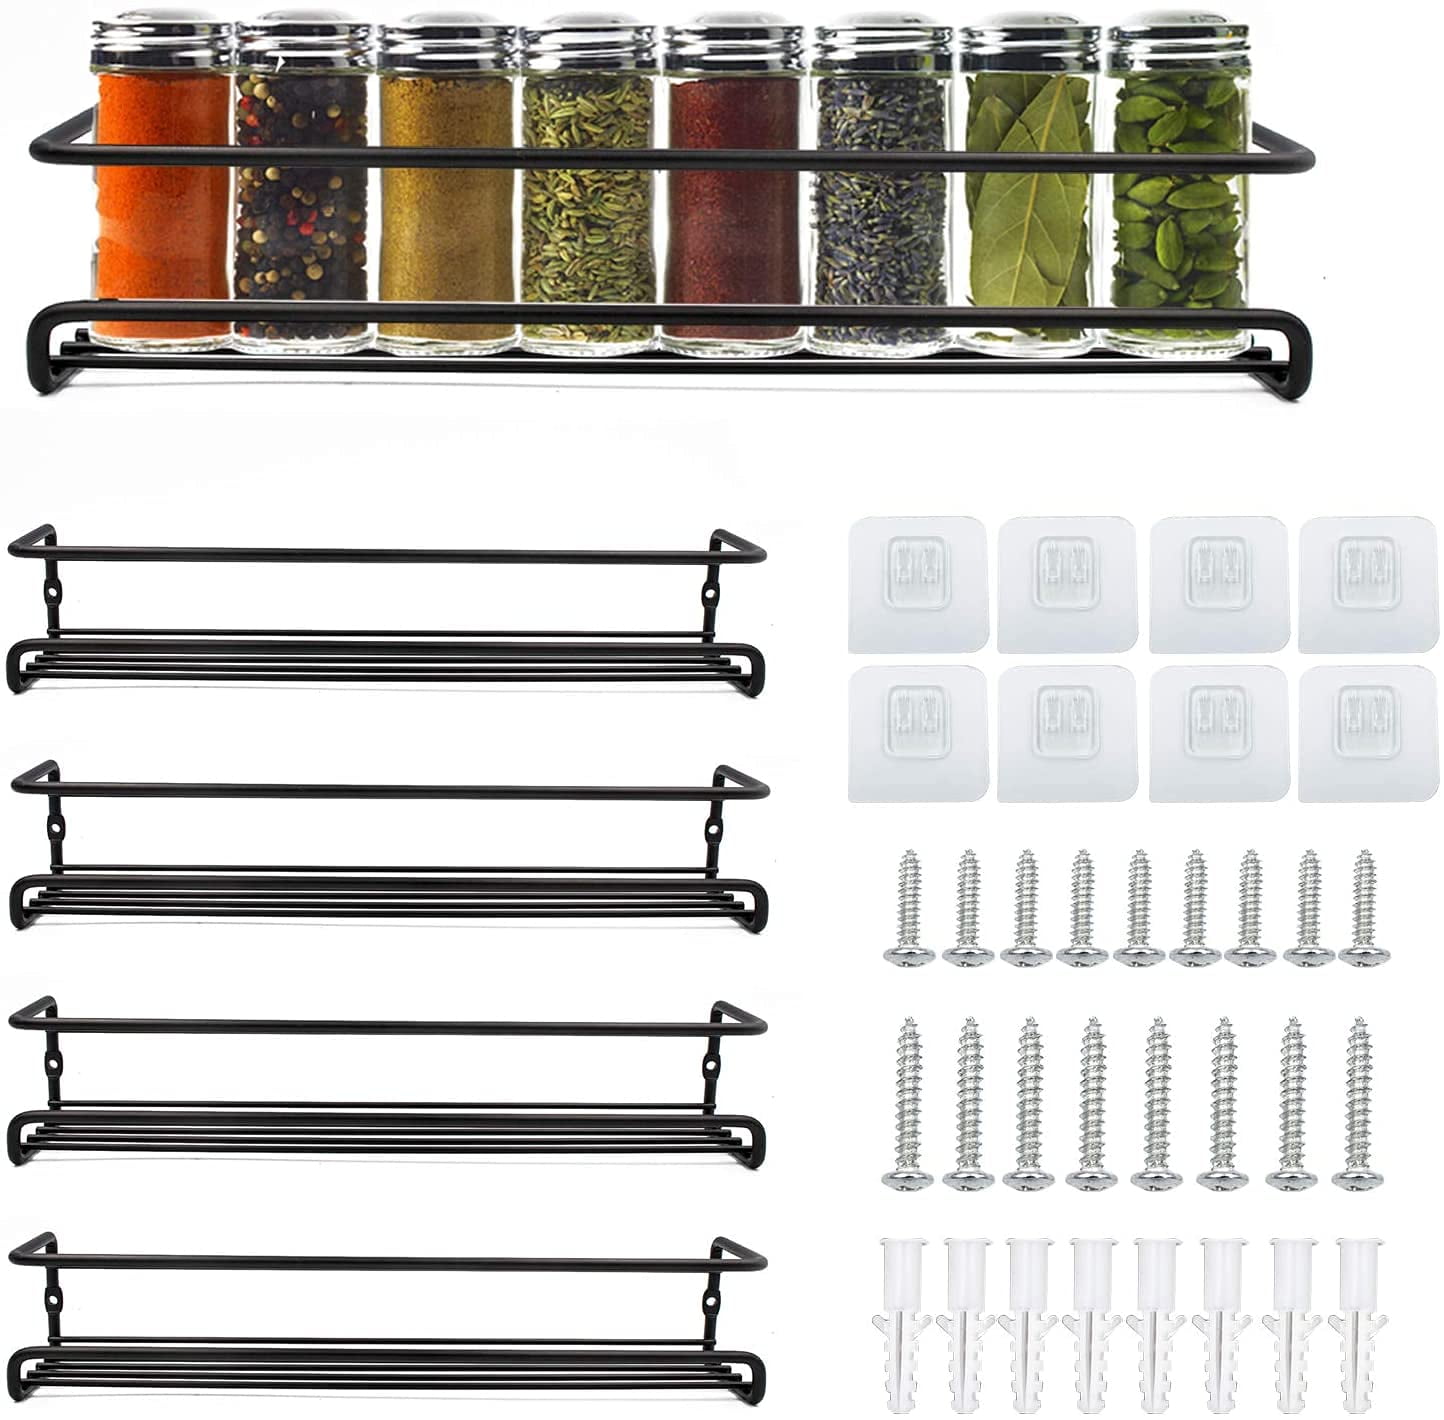 Spice Rack, Complete Your Kitchen With This Stylish And Functional Spice  Rack Set! Seasoning Box, Seasoning Separation, Storage Box, Seasoning  Organizer, Seasoning Rack, Spice Tank, Four In One Spice Storage Box,  Detachable